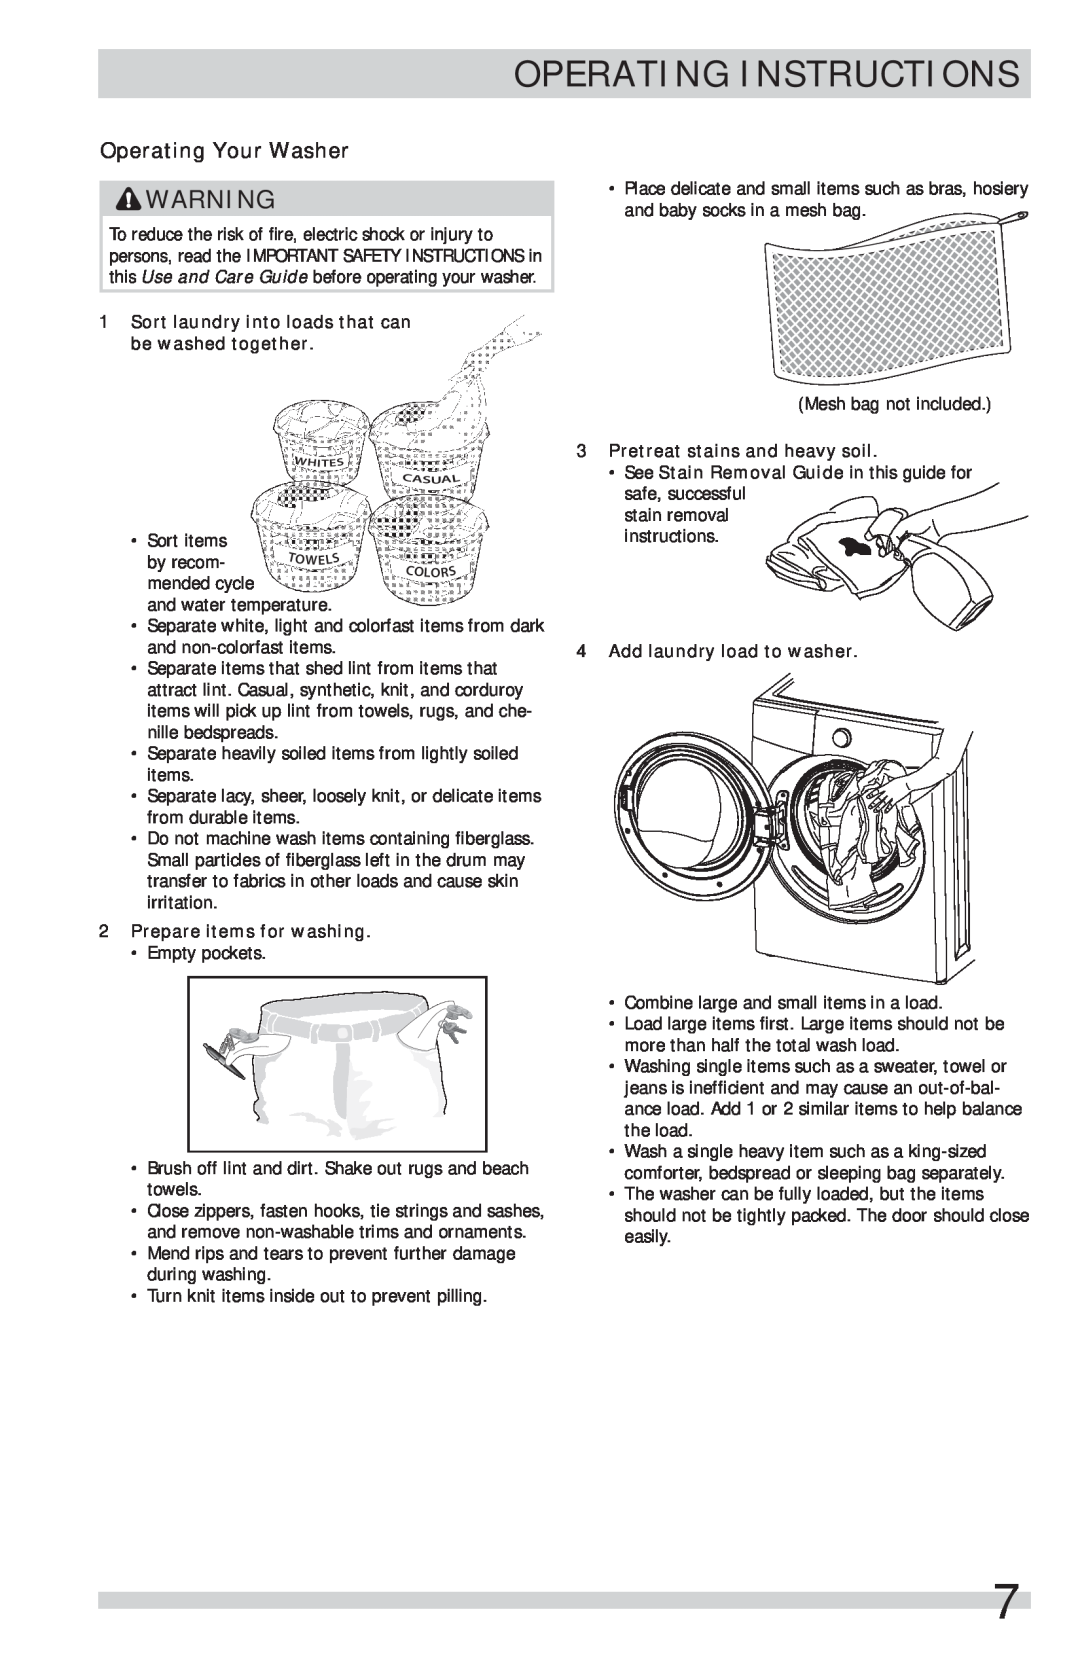 Frigidaire FFFS5115PA Operating Your Washer, Sort laundry into loads that can be washed together, Operating Instructions 